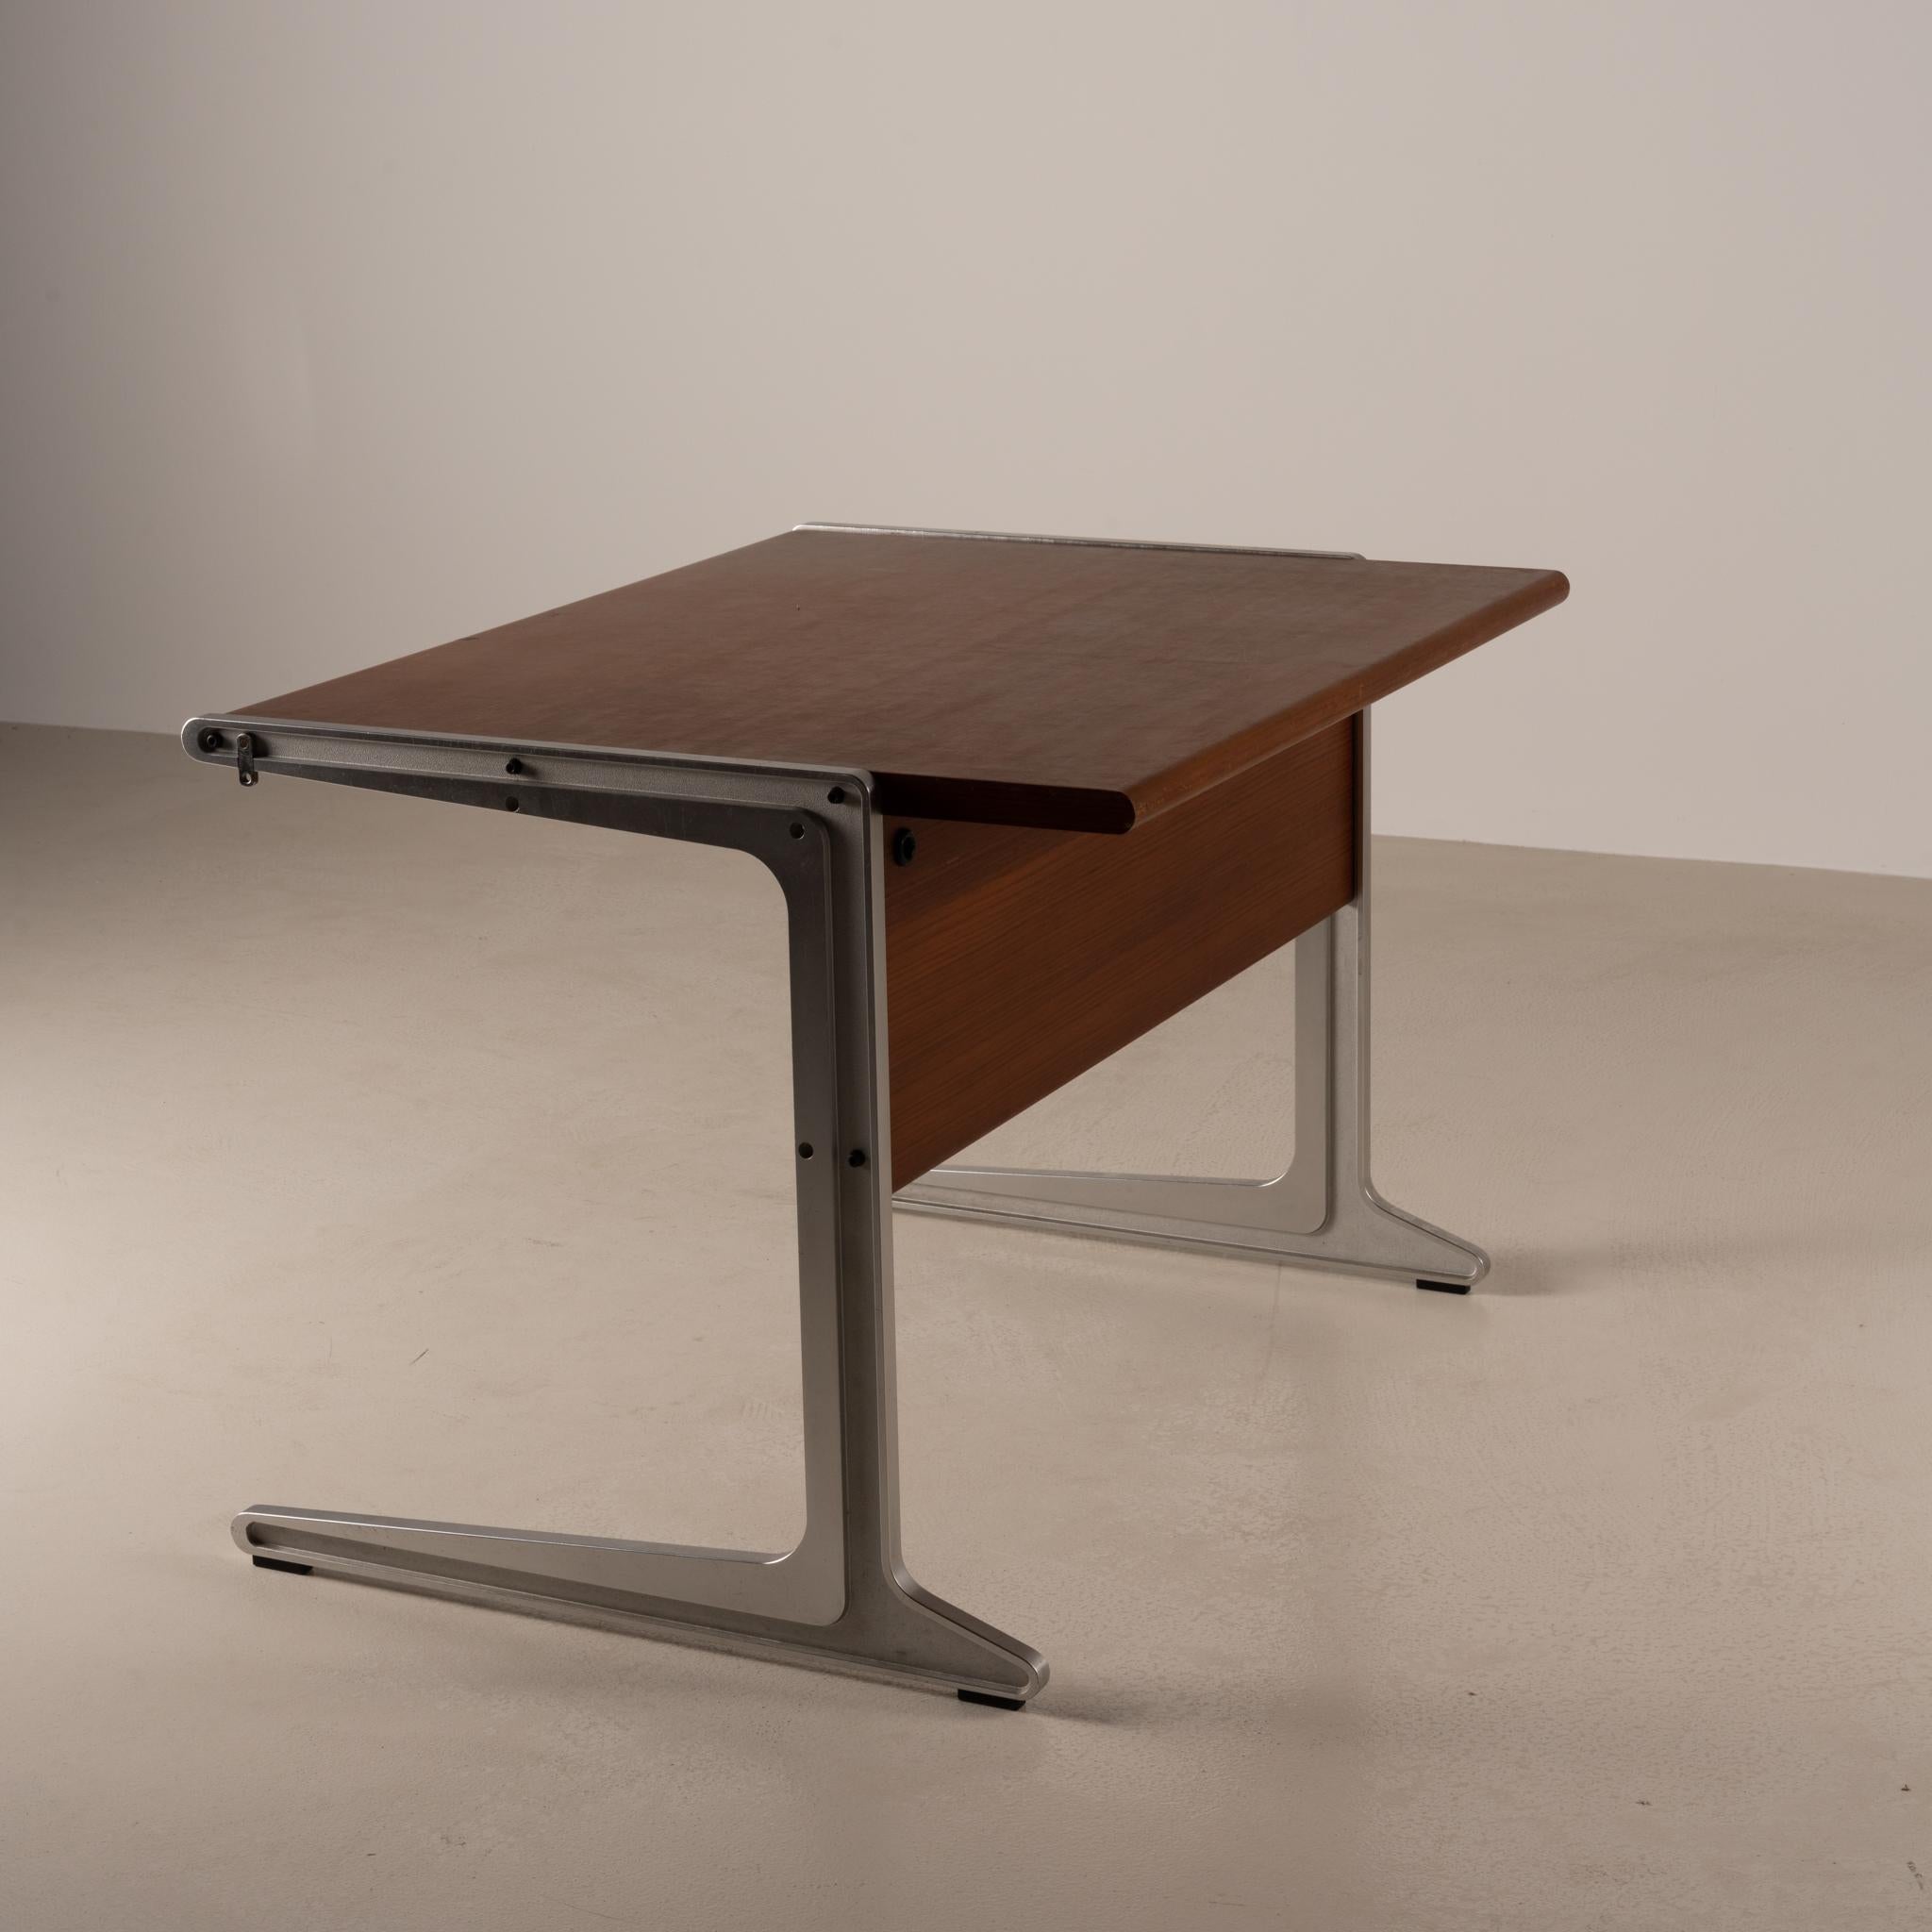 This desk has been designed by Isamu Kenmochi for OF Group 1 Collection at Tendo Mokko in 1971. It has 2 drawers with slots for office equipment and the manufacturer's label under the table top.

Japanese Modern : Isamu Kenmochi Retrospective,